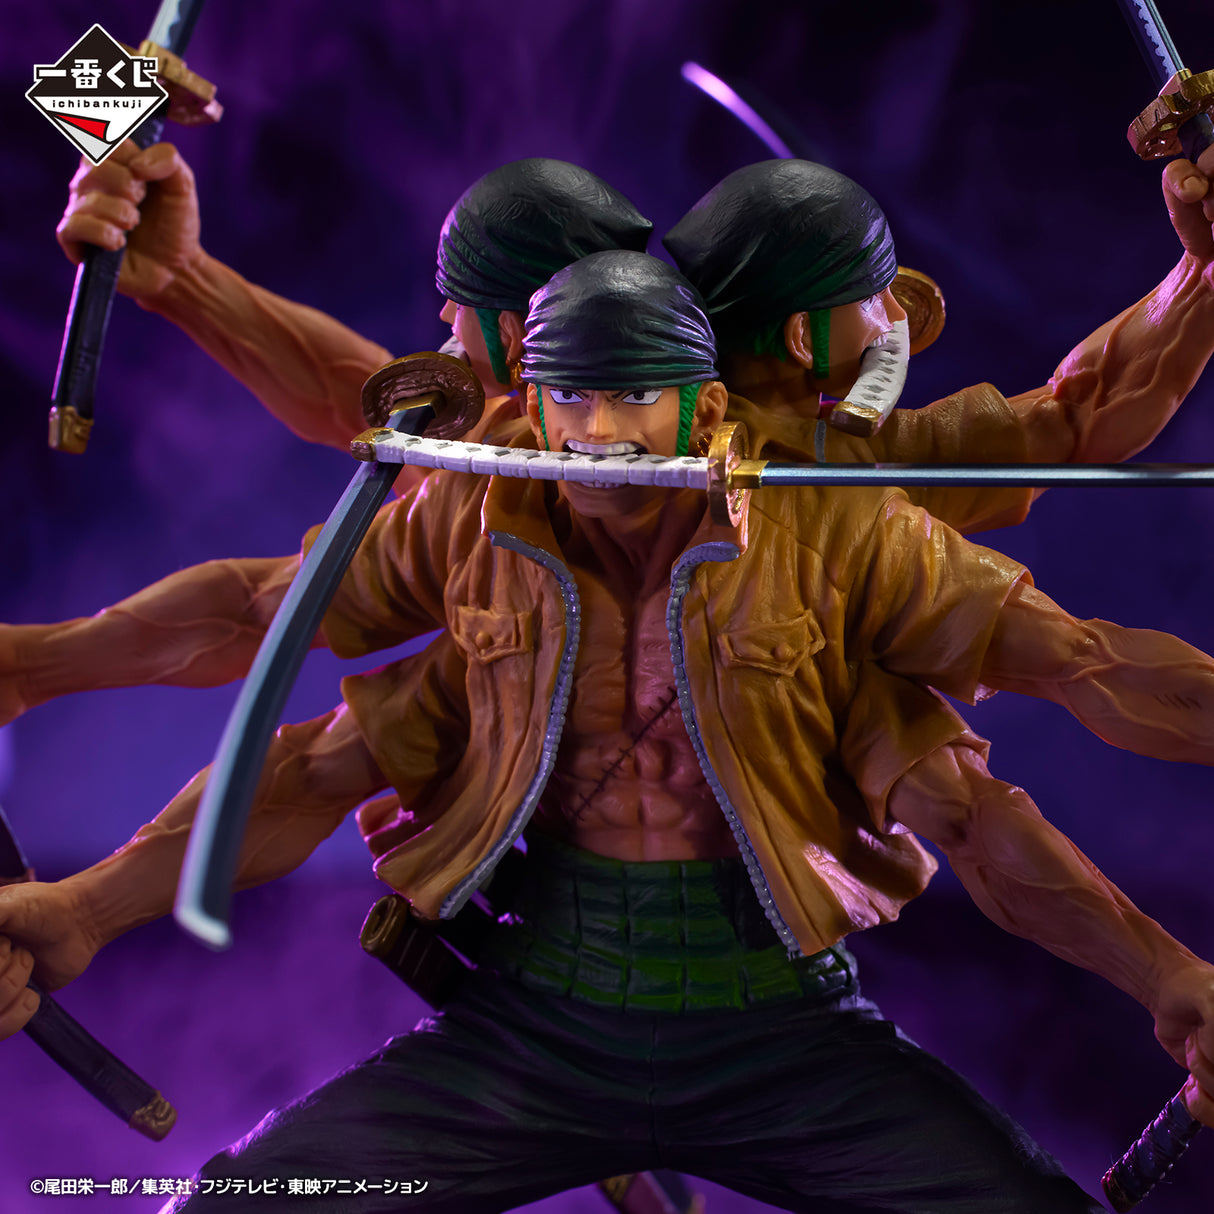 One Piece - Roronoa Zoro - Ichiban Kuji EX - The Genealogy of the Swordsman’s Soul - A Prize (Bandai Spirits), Release Date: 18. May 2024, Dimensions: Height 16 cm, Nippon Figures